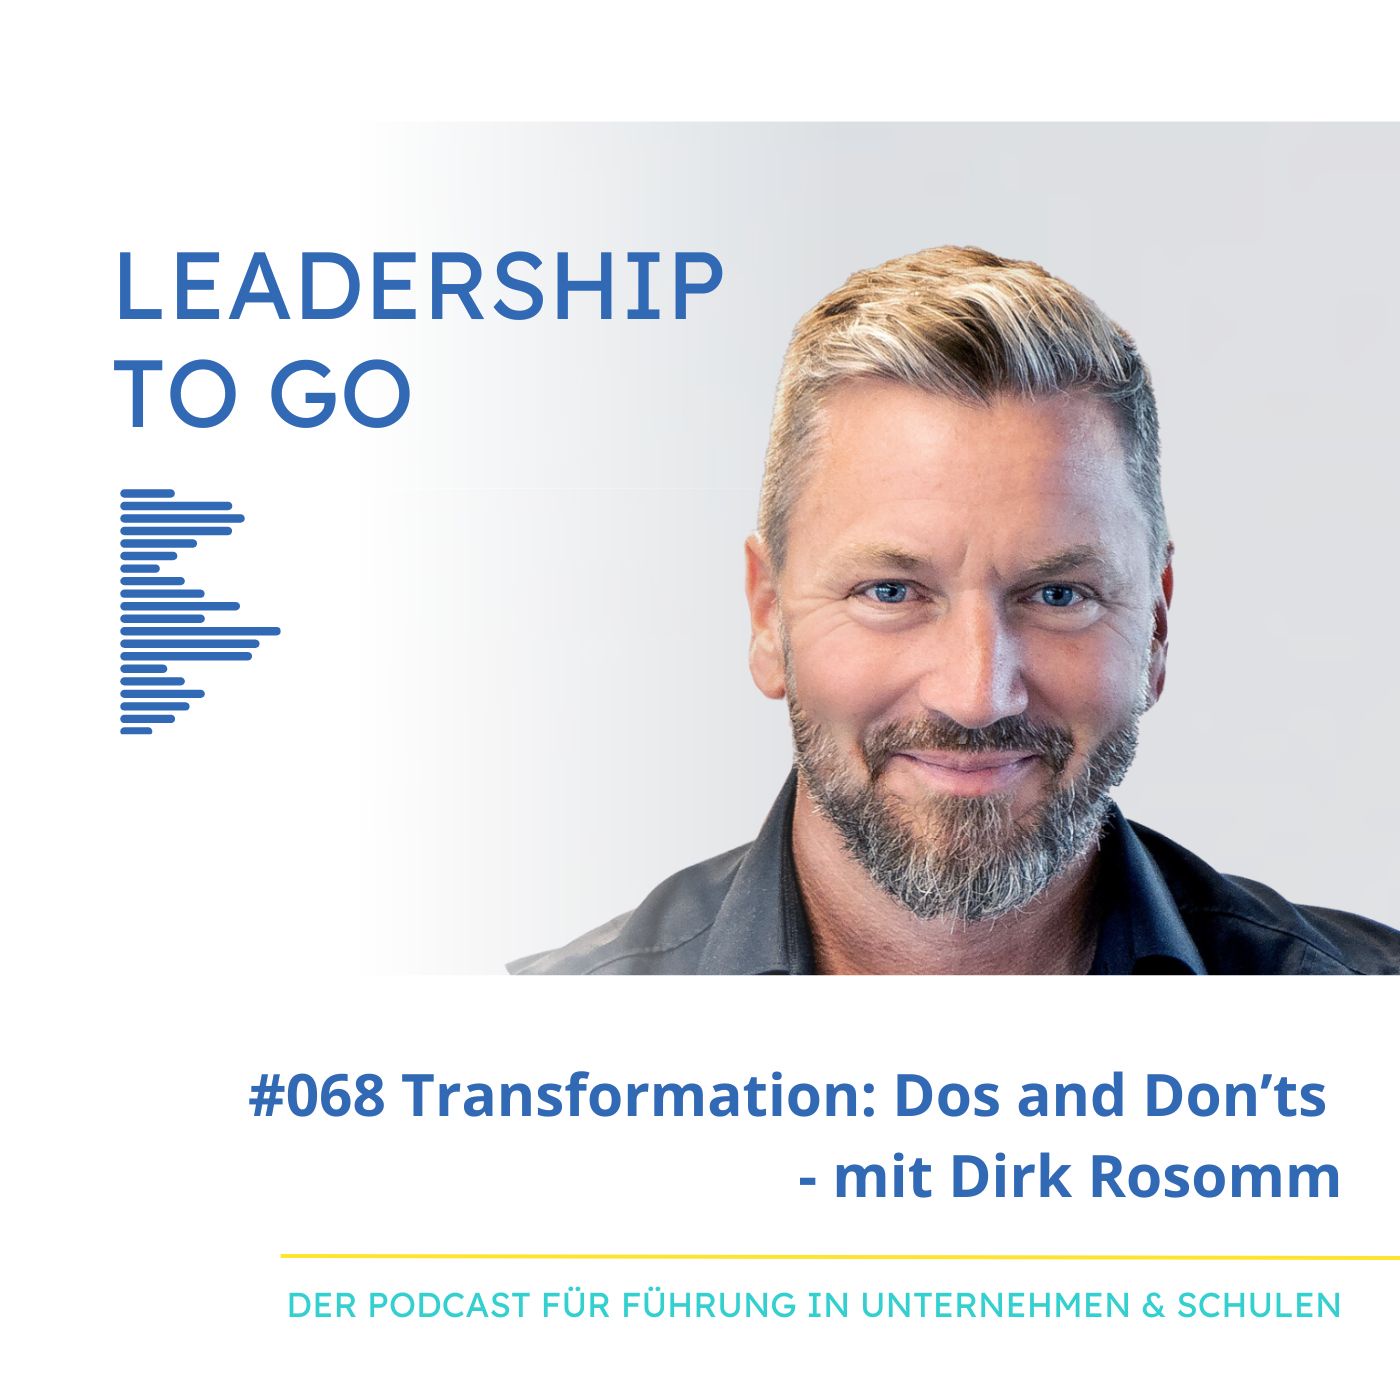 #068 Transformation Dos and Don'ts - mit Dirk Rosomm